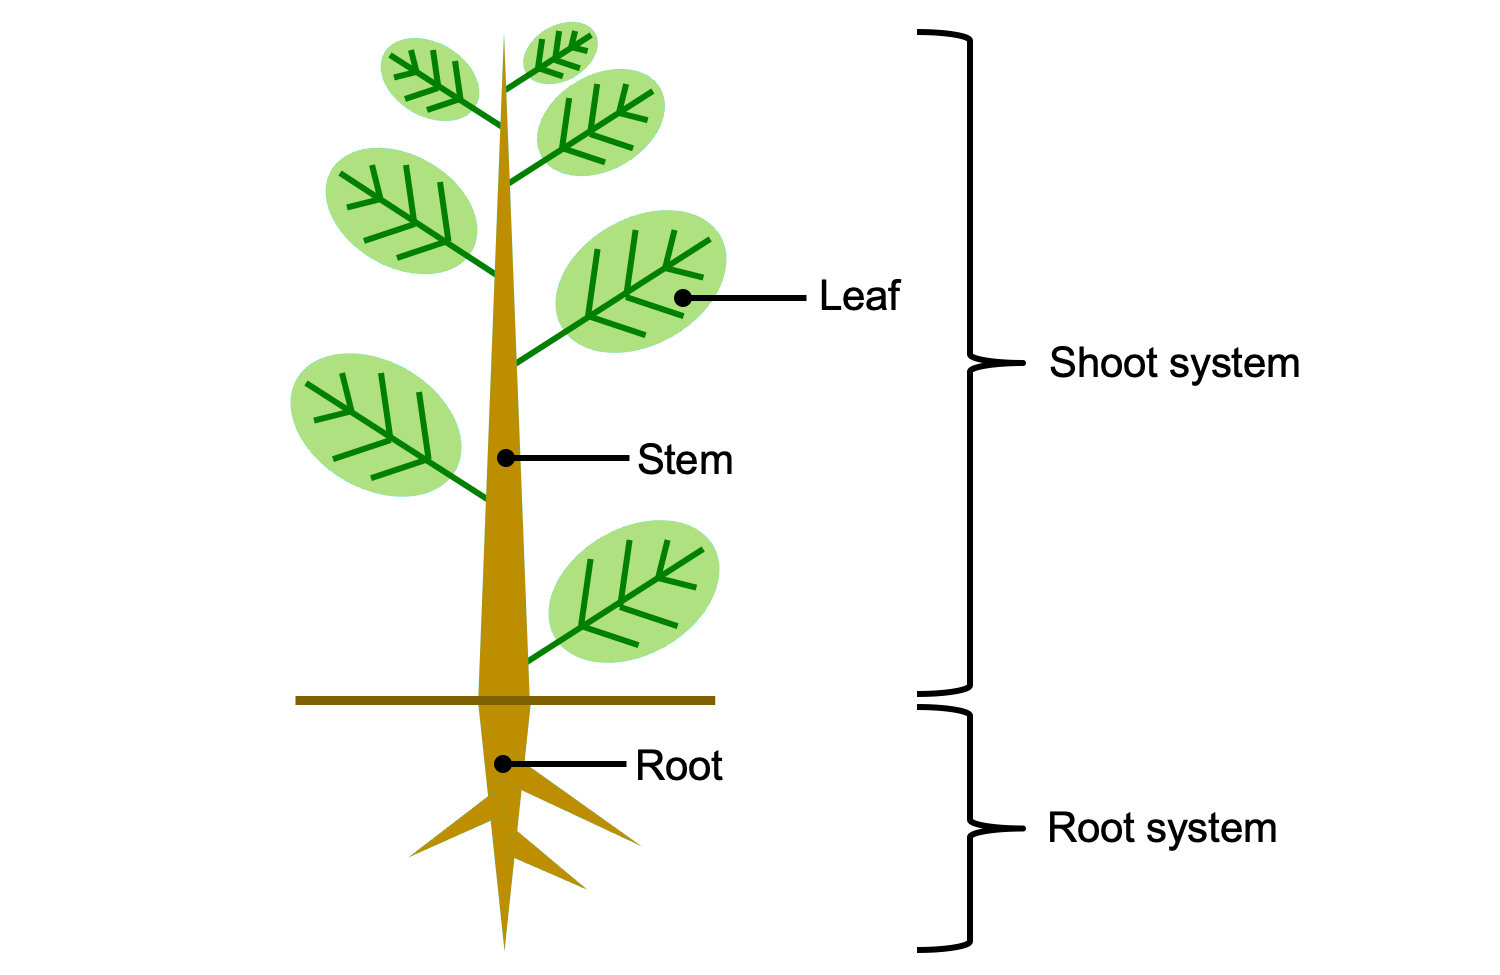 Simple illustration of a plant showing the organs (leaf, stem, and root) and systems (shoot system, root system)